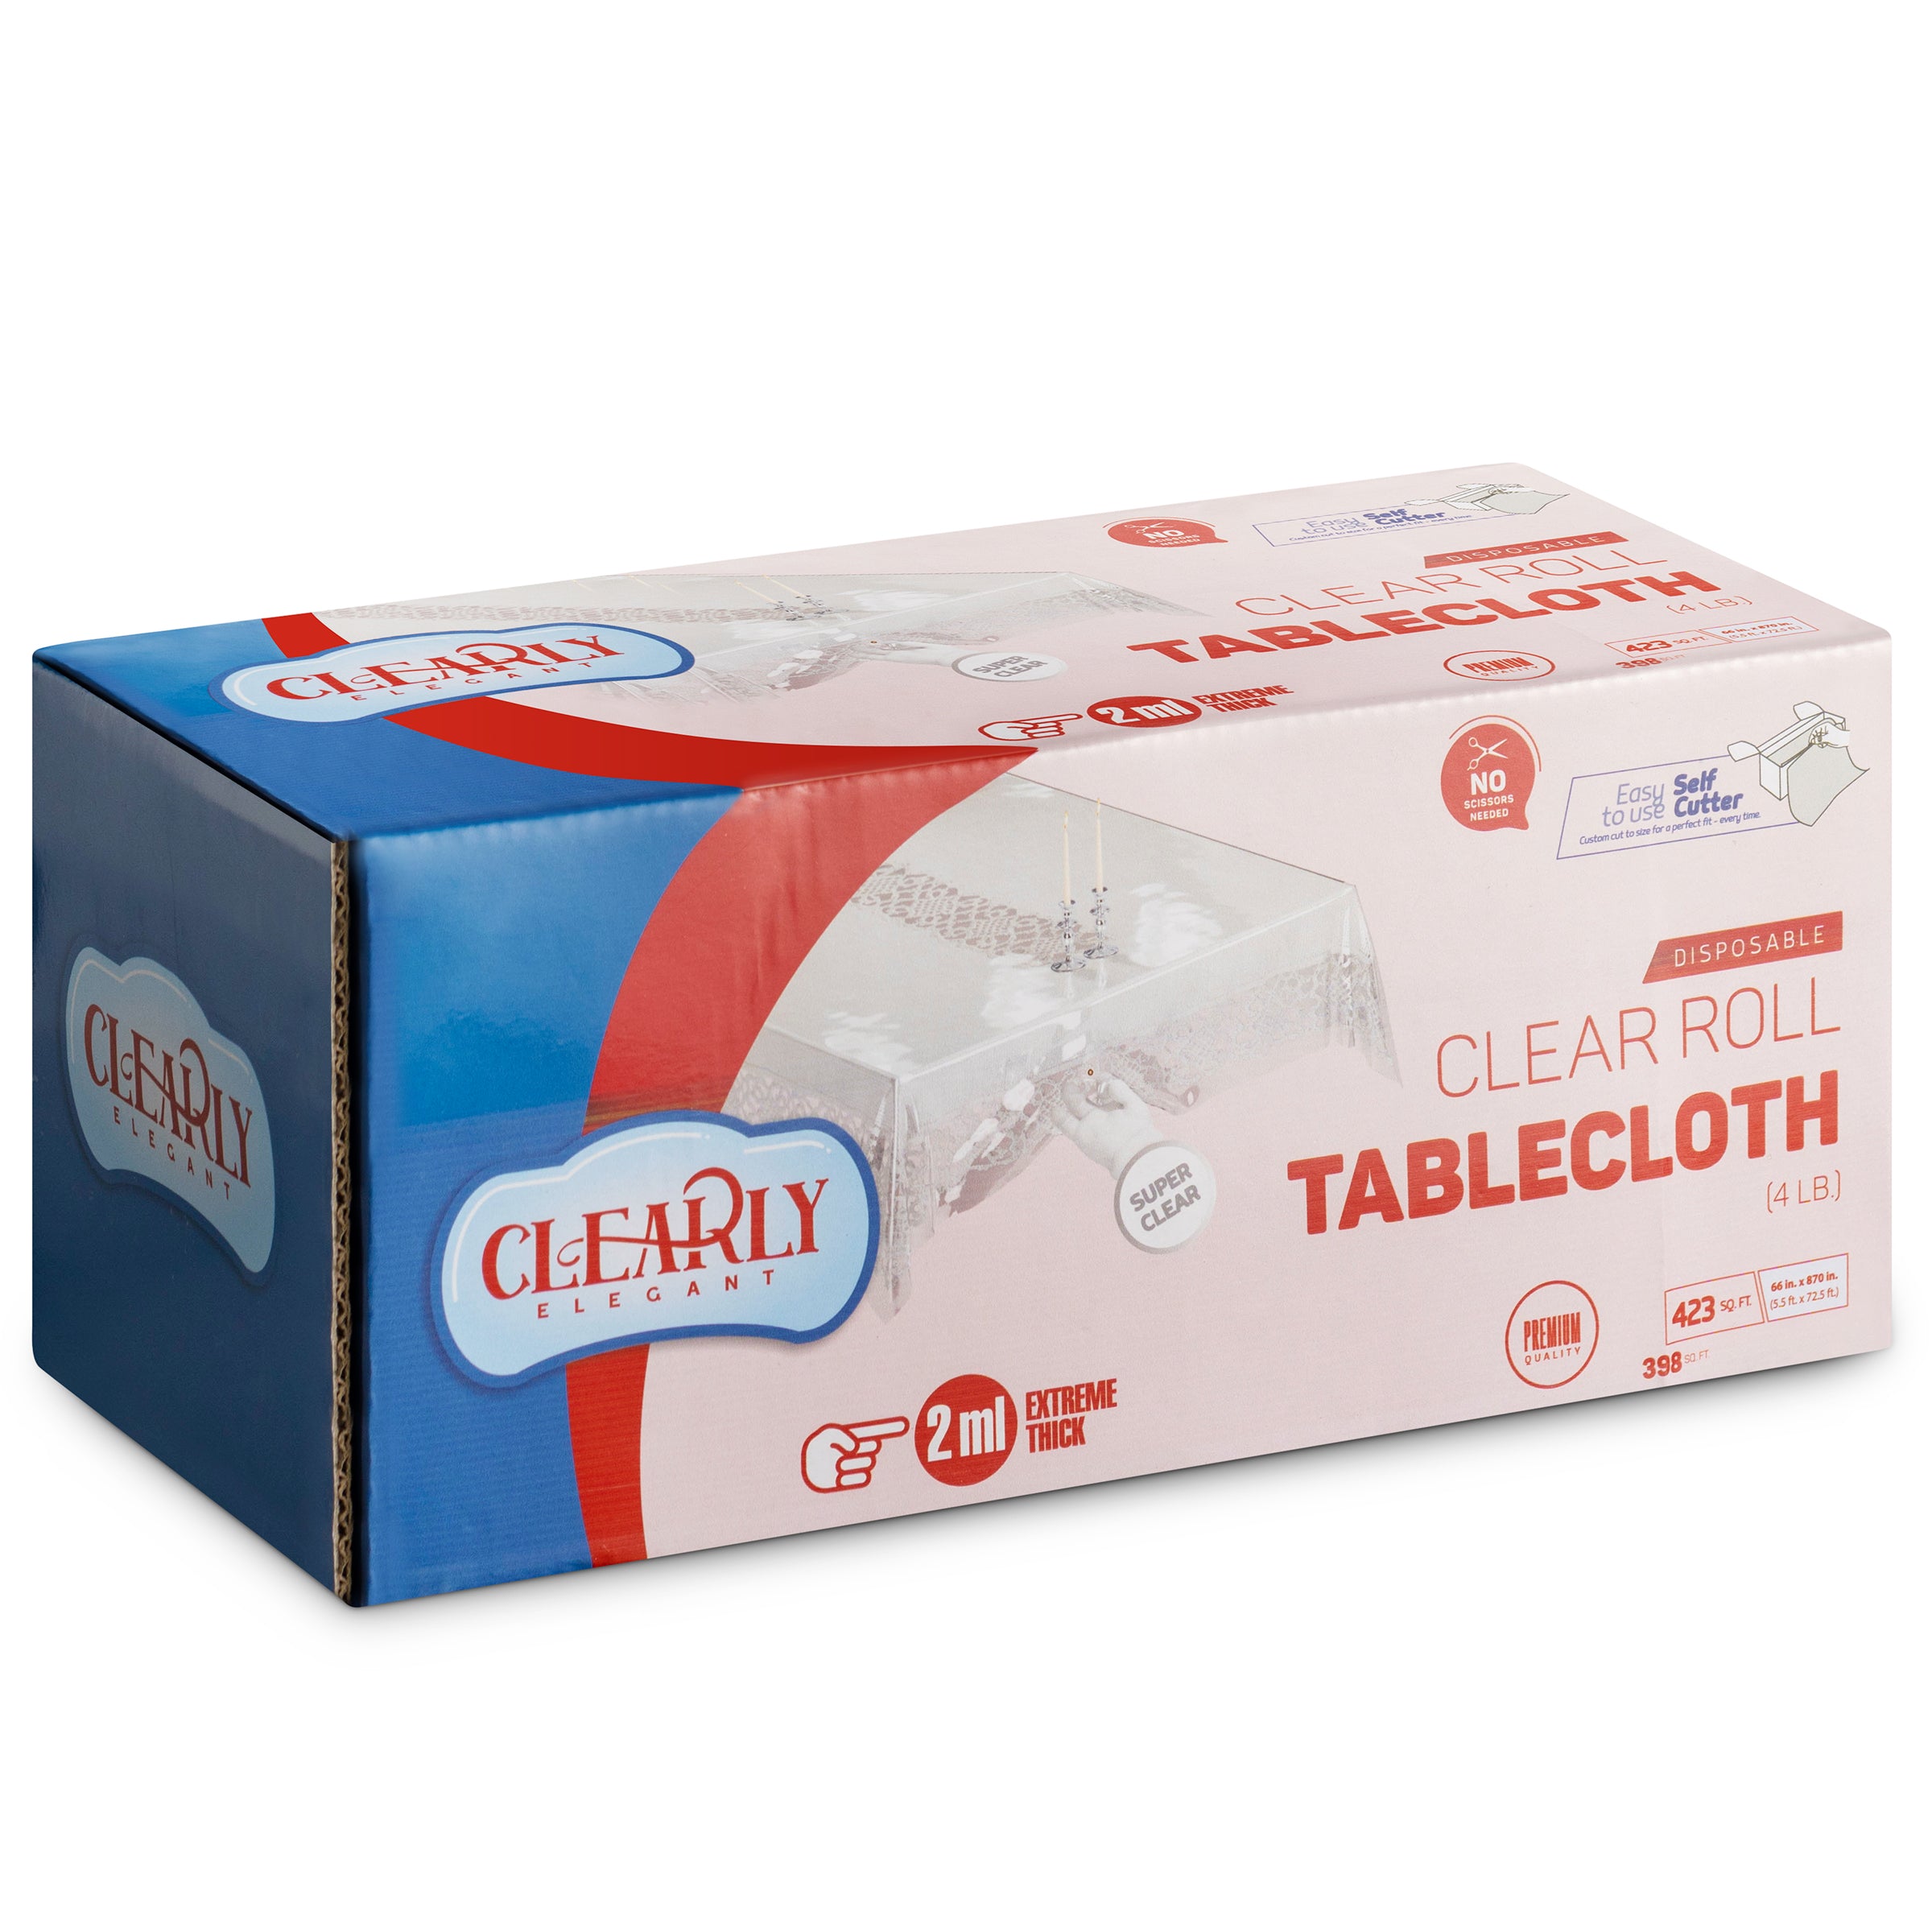 CLEAR PLASTIC TABLE COVER, Tablecloths Covering, Table Protector, Wide Thick Disposable & Reusable on a Roll with SELF CUTTER, Protects from Spills, Water, Oil, ''66 In x 72.5'' Ft